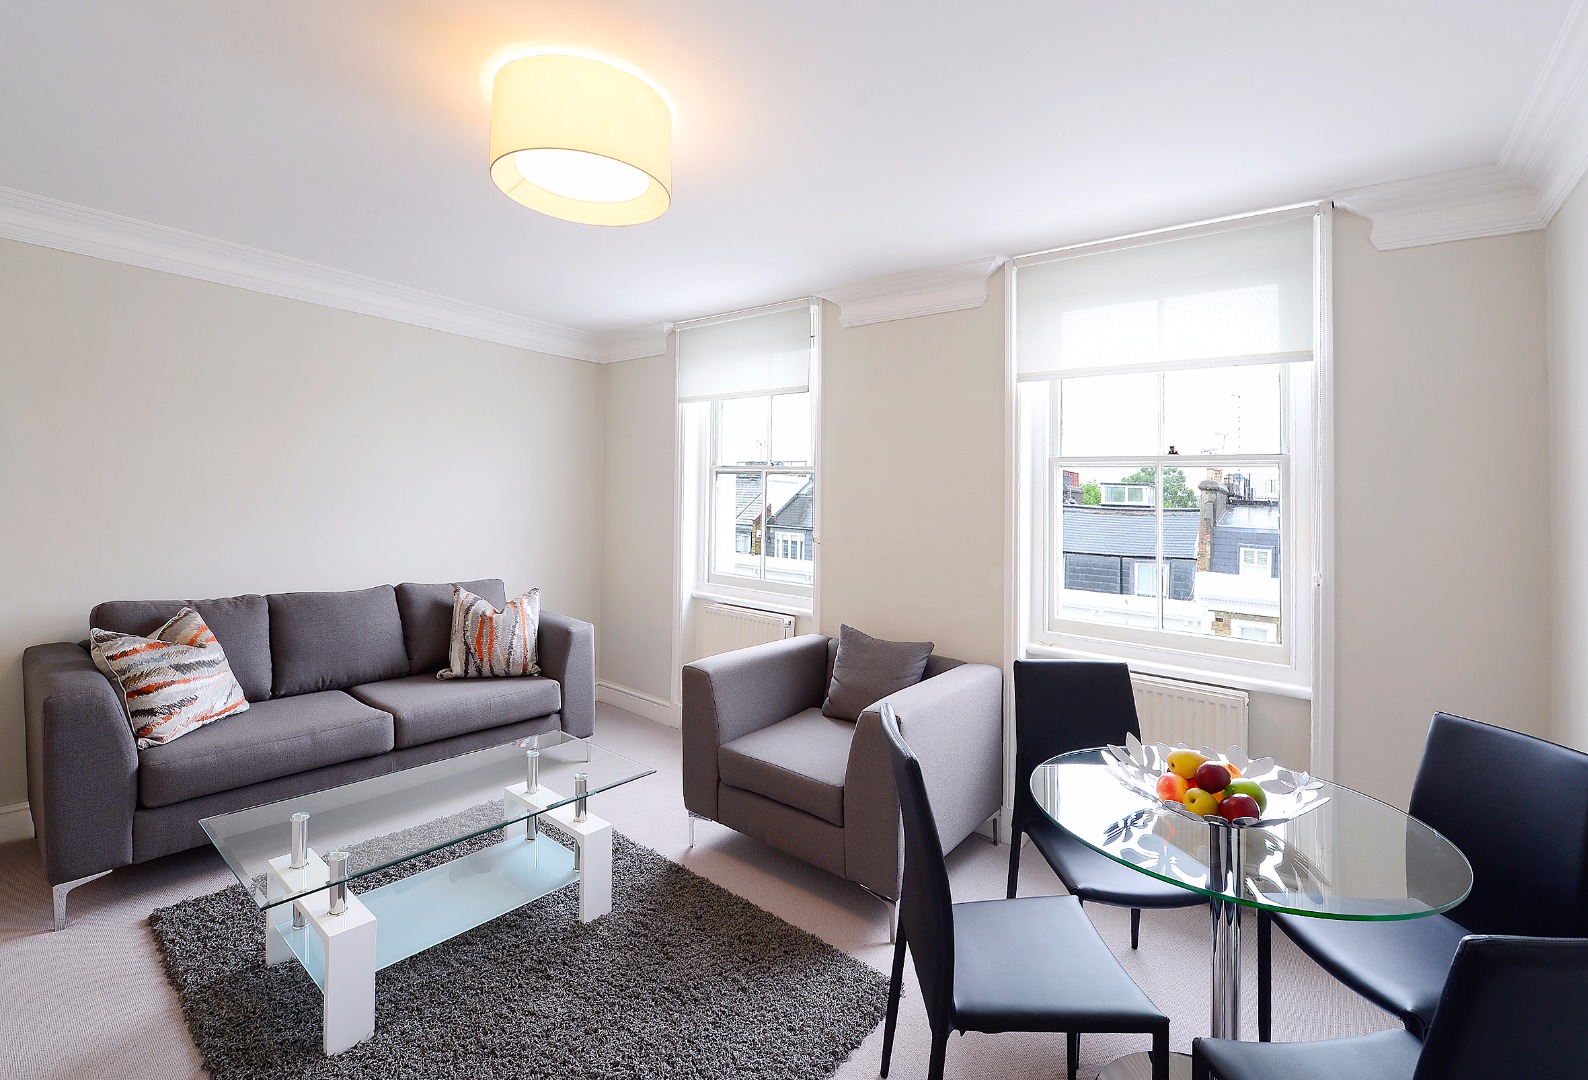 Flat to rent on Lexham Gardens - Property Image 1